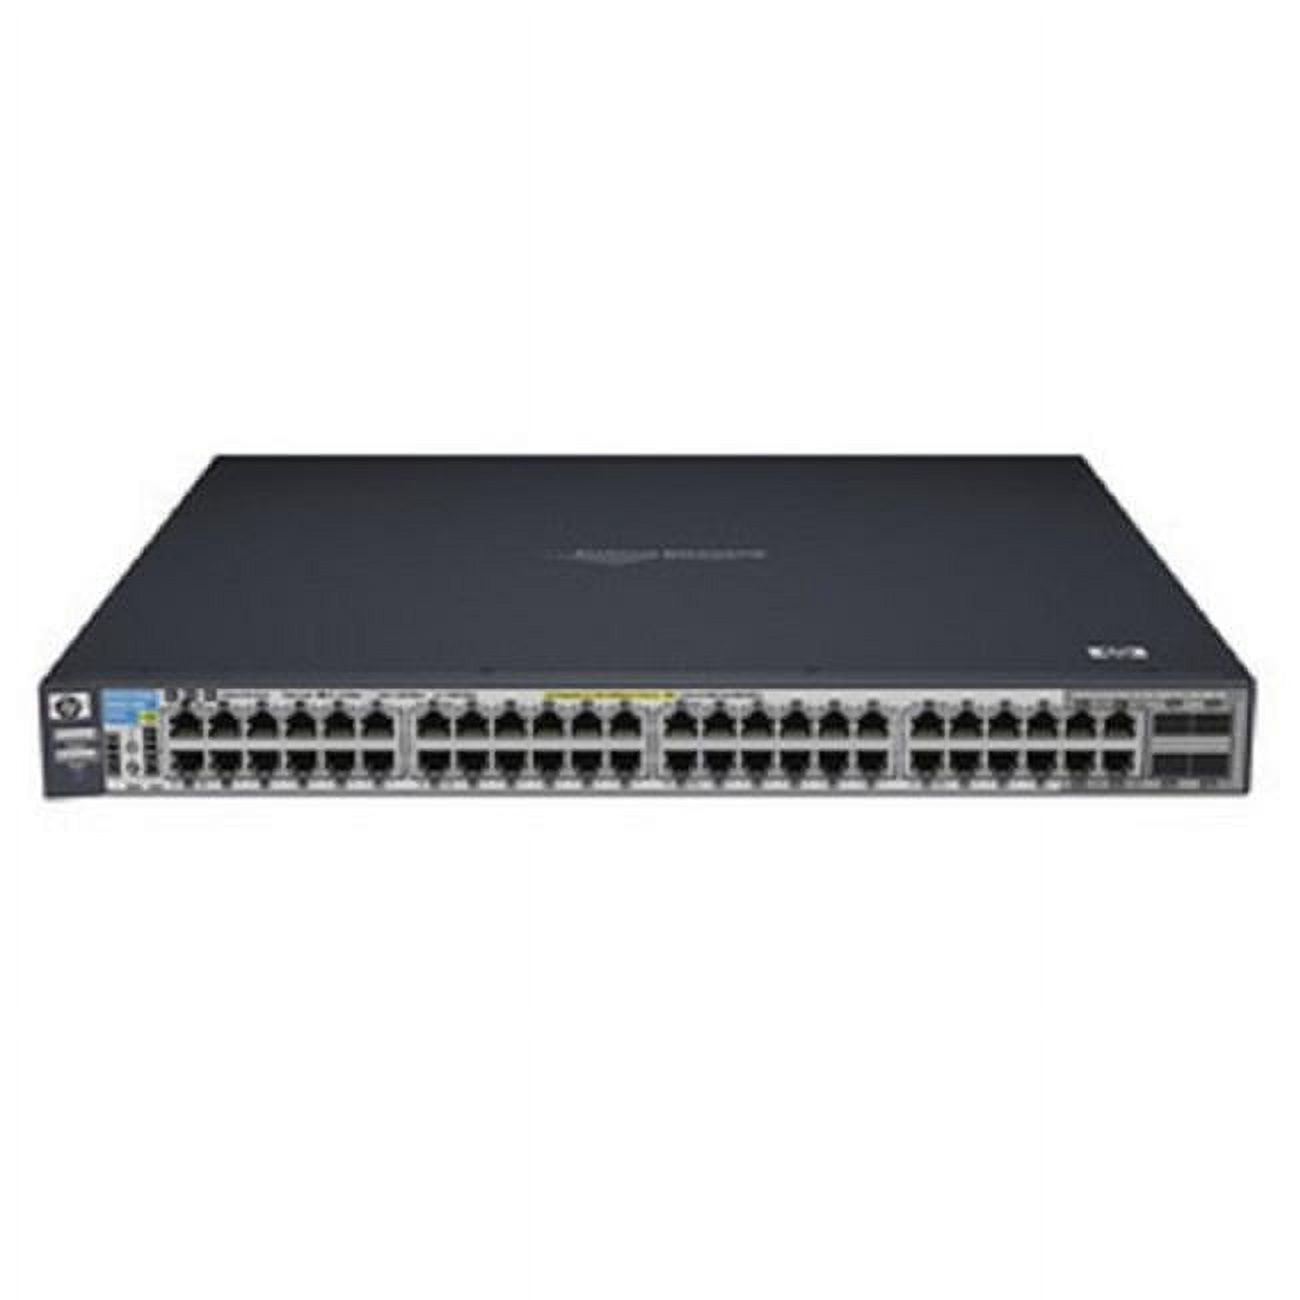 Picture of Depot International J8693A-REF ProCurve 3500yl 48G Power Managed Ethernet Switch for HP